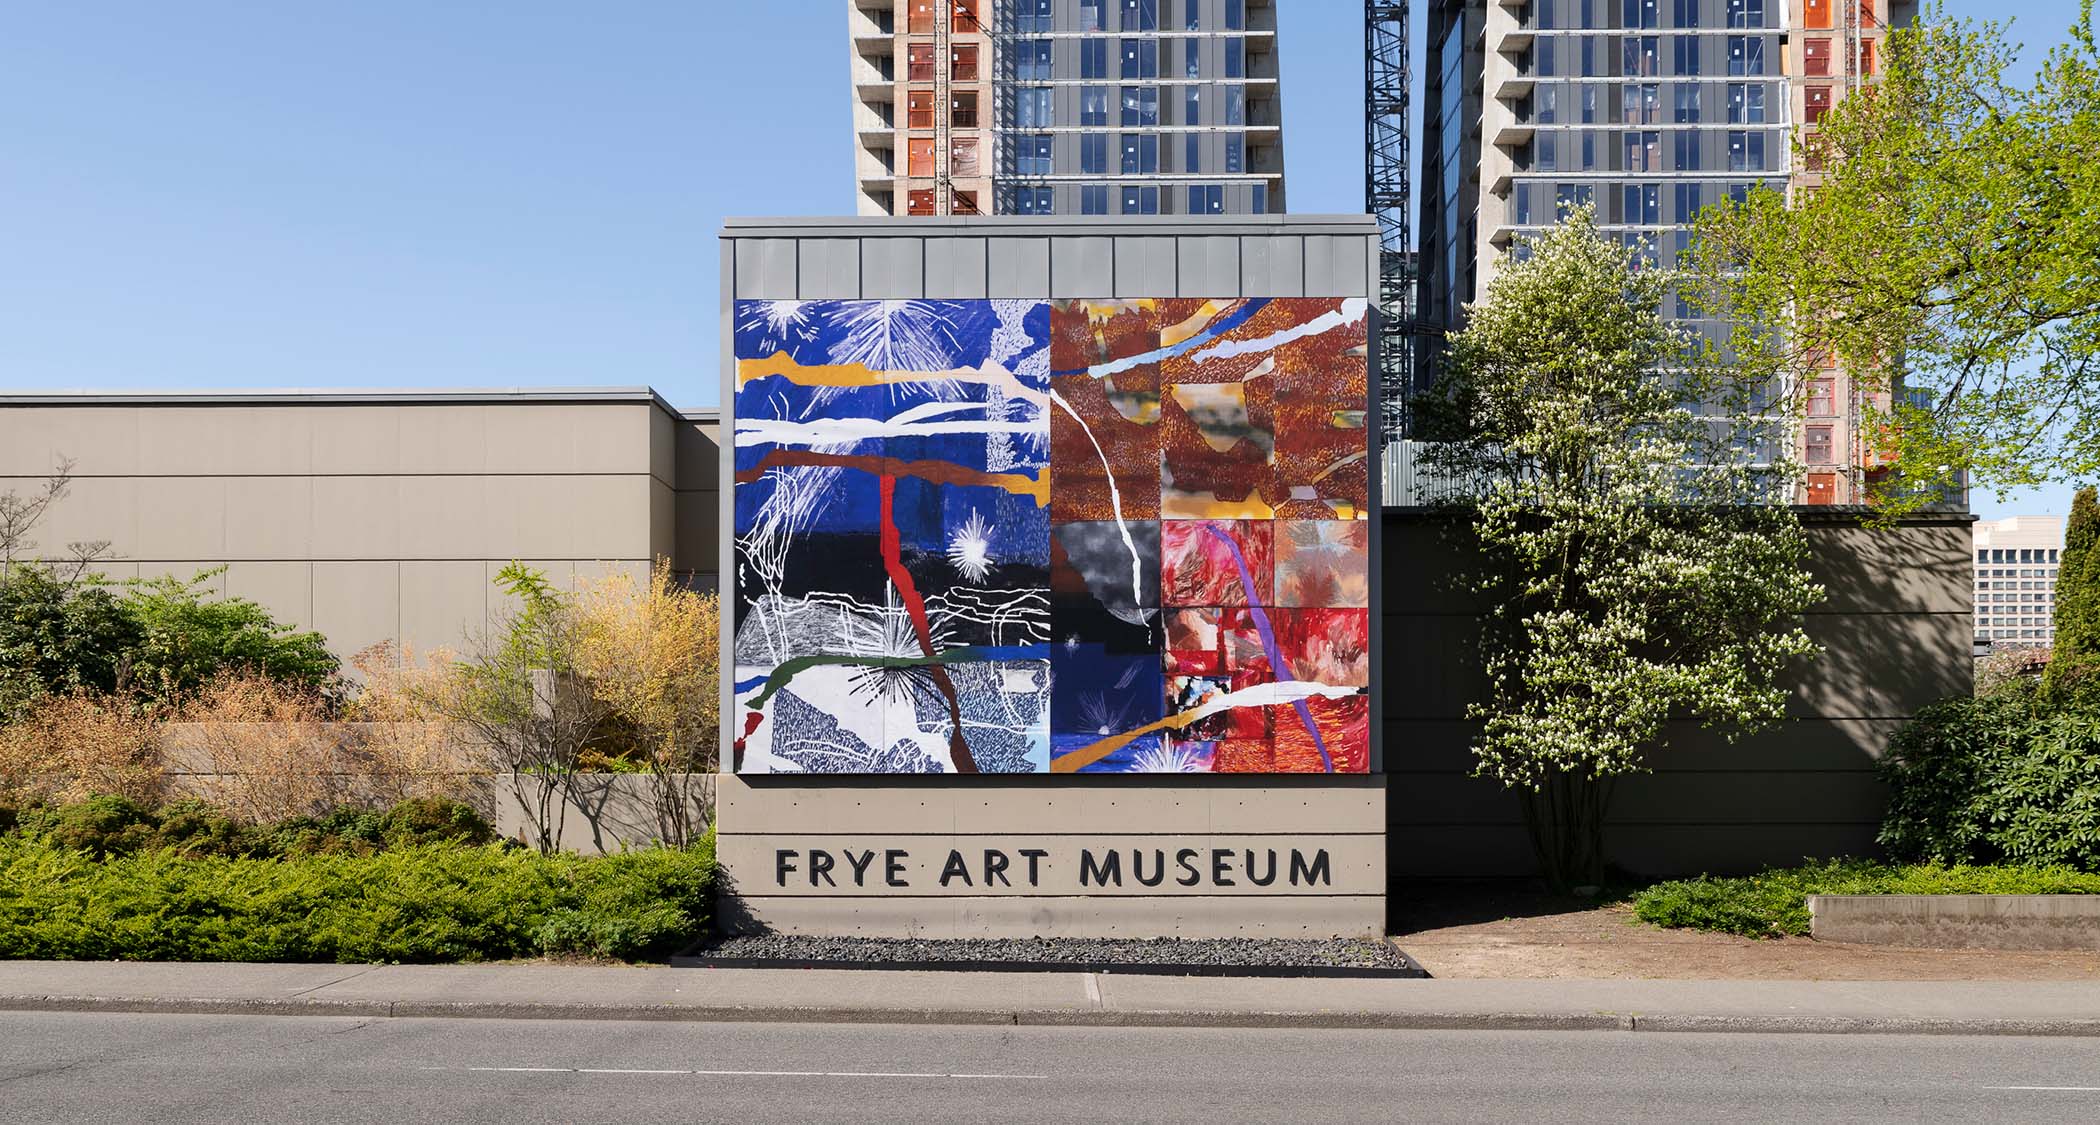 North facing exterior of the Frye Art Museum building, featuring a Boren Banner by artist Russna Kaur